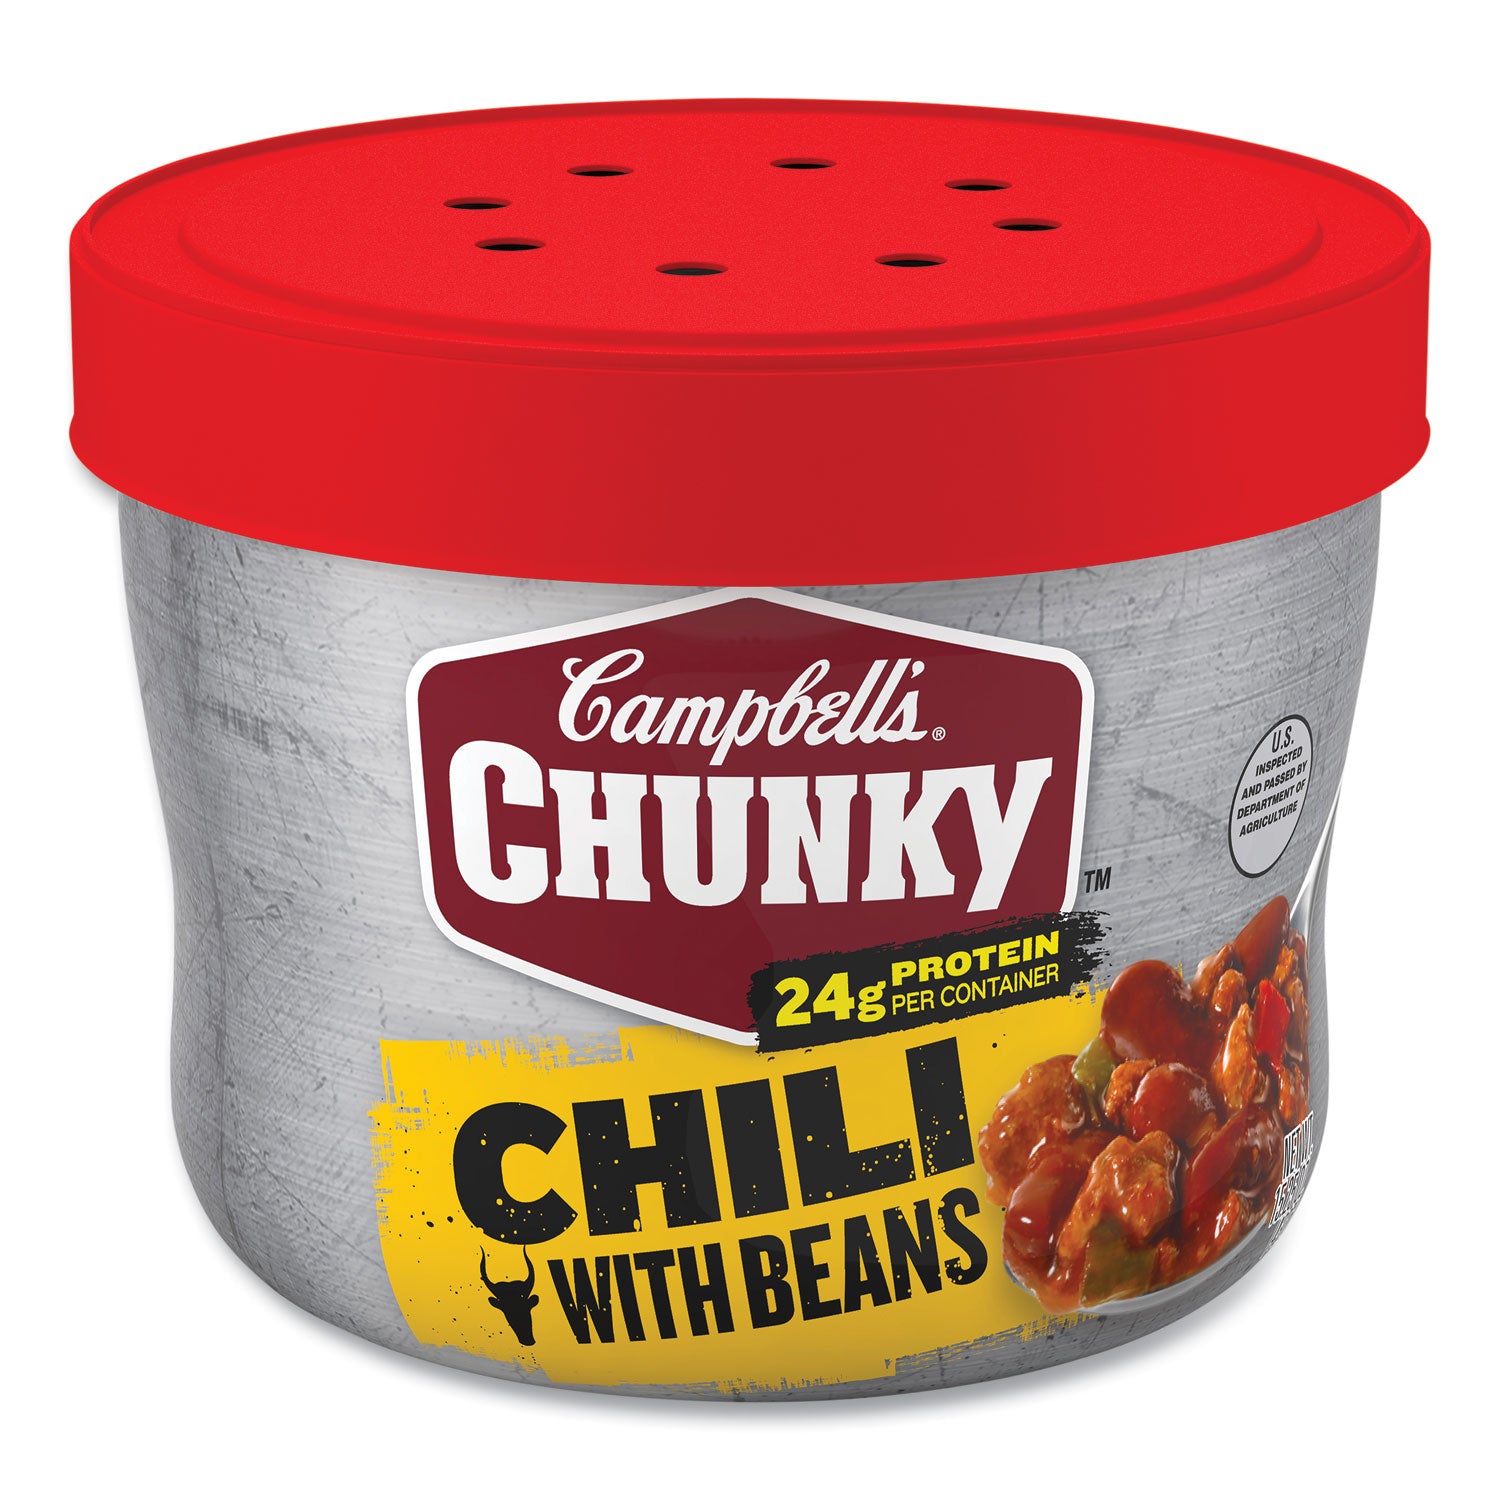 chunky-chili-with-beans-1525-oz-bowl-8-carton-ships-in-1-3-business-days_grr35100009 - 3